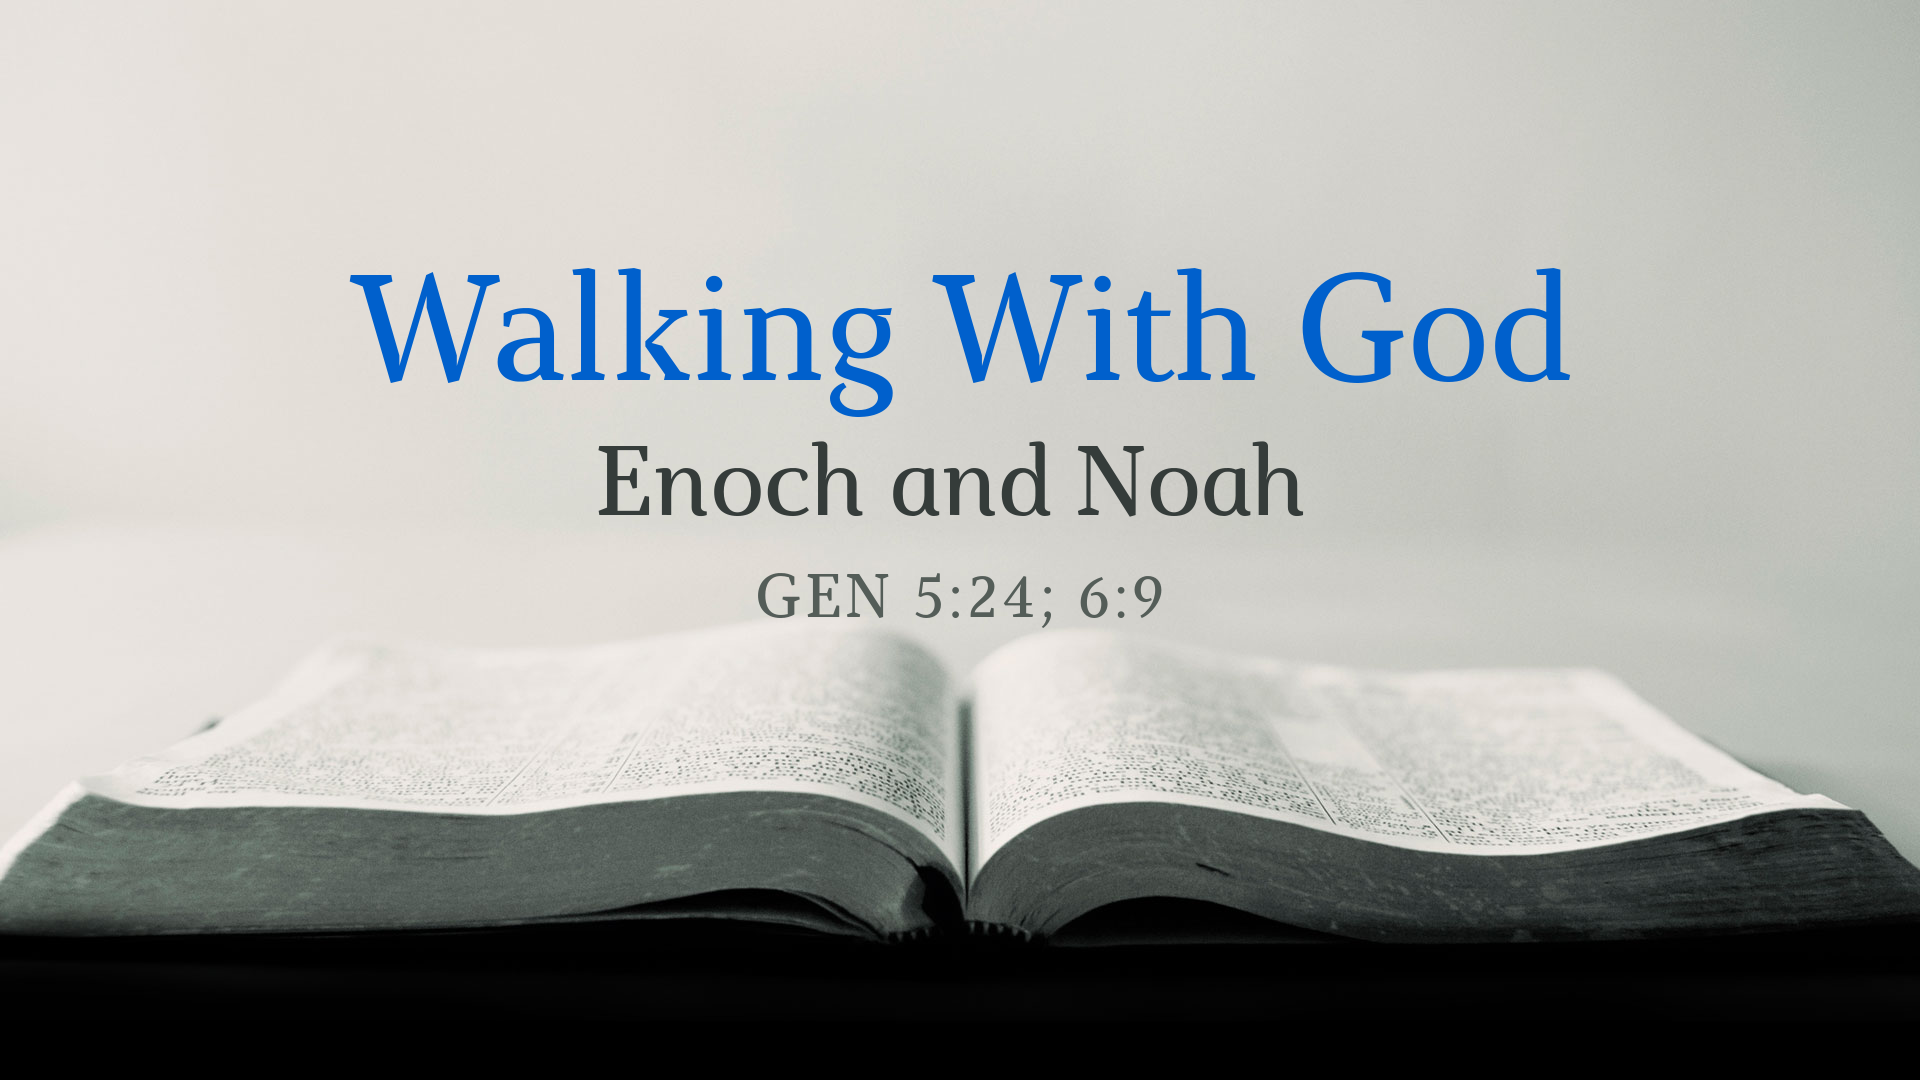 ENOCH WALKED WITH GOD